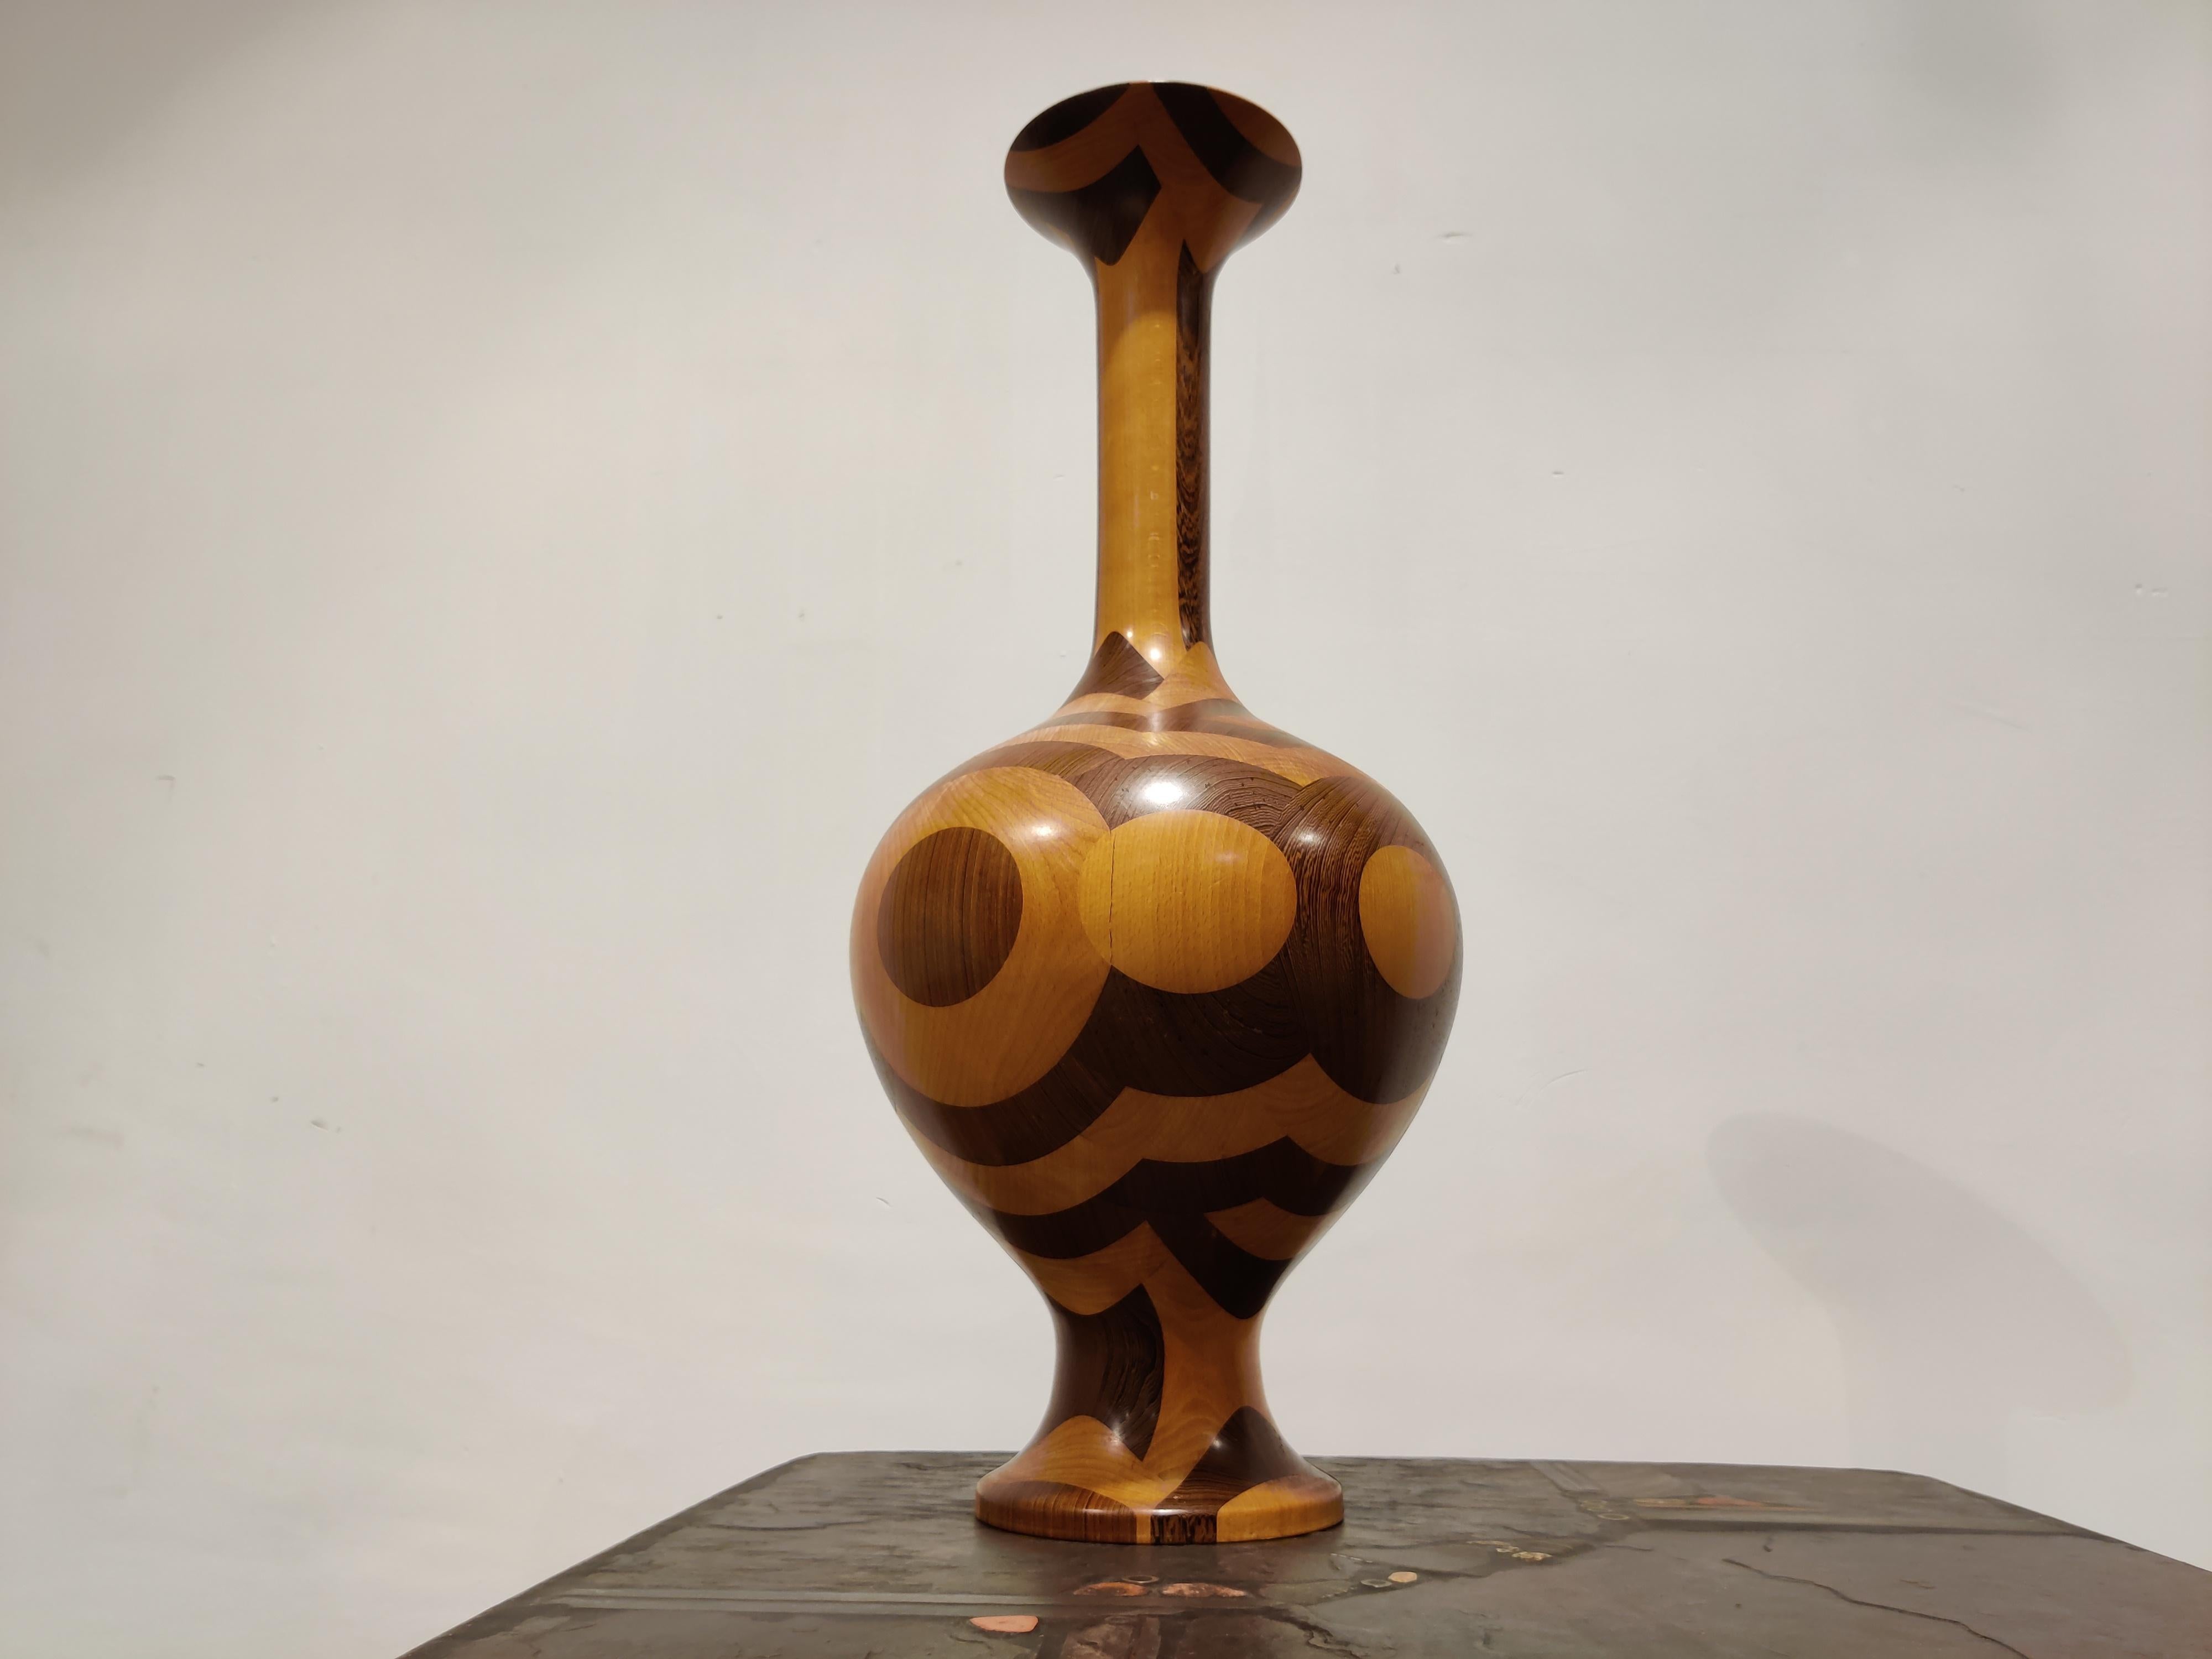 Elegant organic shaped wooden vase with inlaid wood by Decoene.

The use of different types of wood together with the fine shape of the vase is what makes this piece a treat for the eyes.

Manufactured by renowned Belgian furniture maker